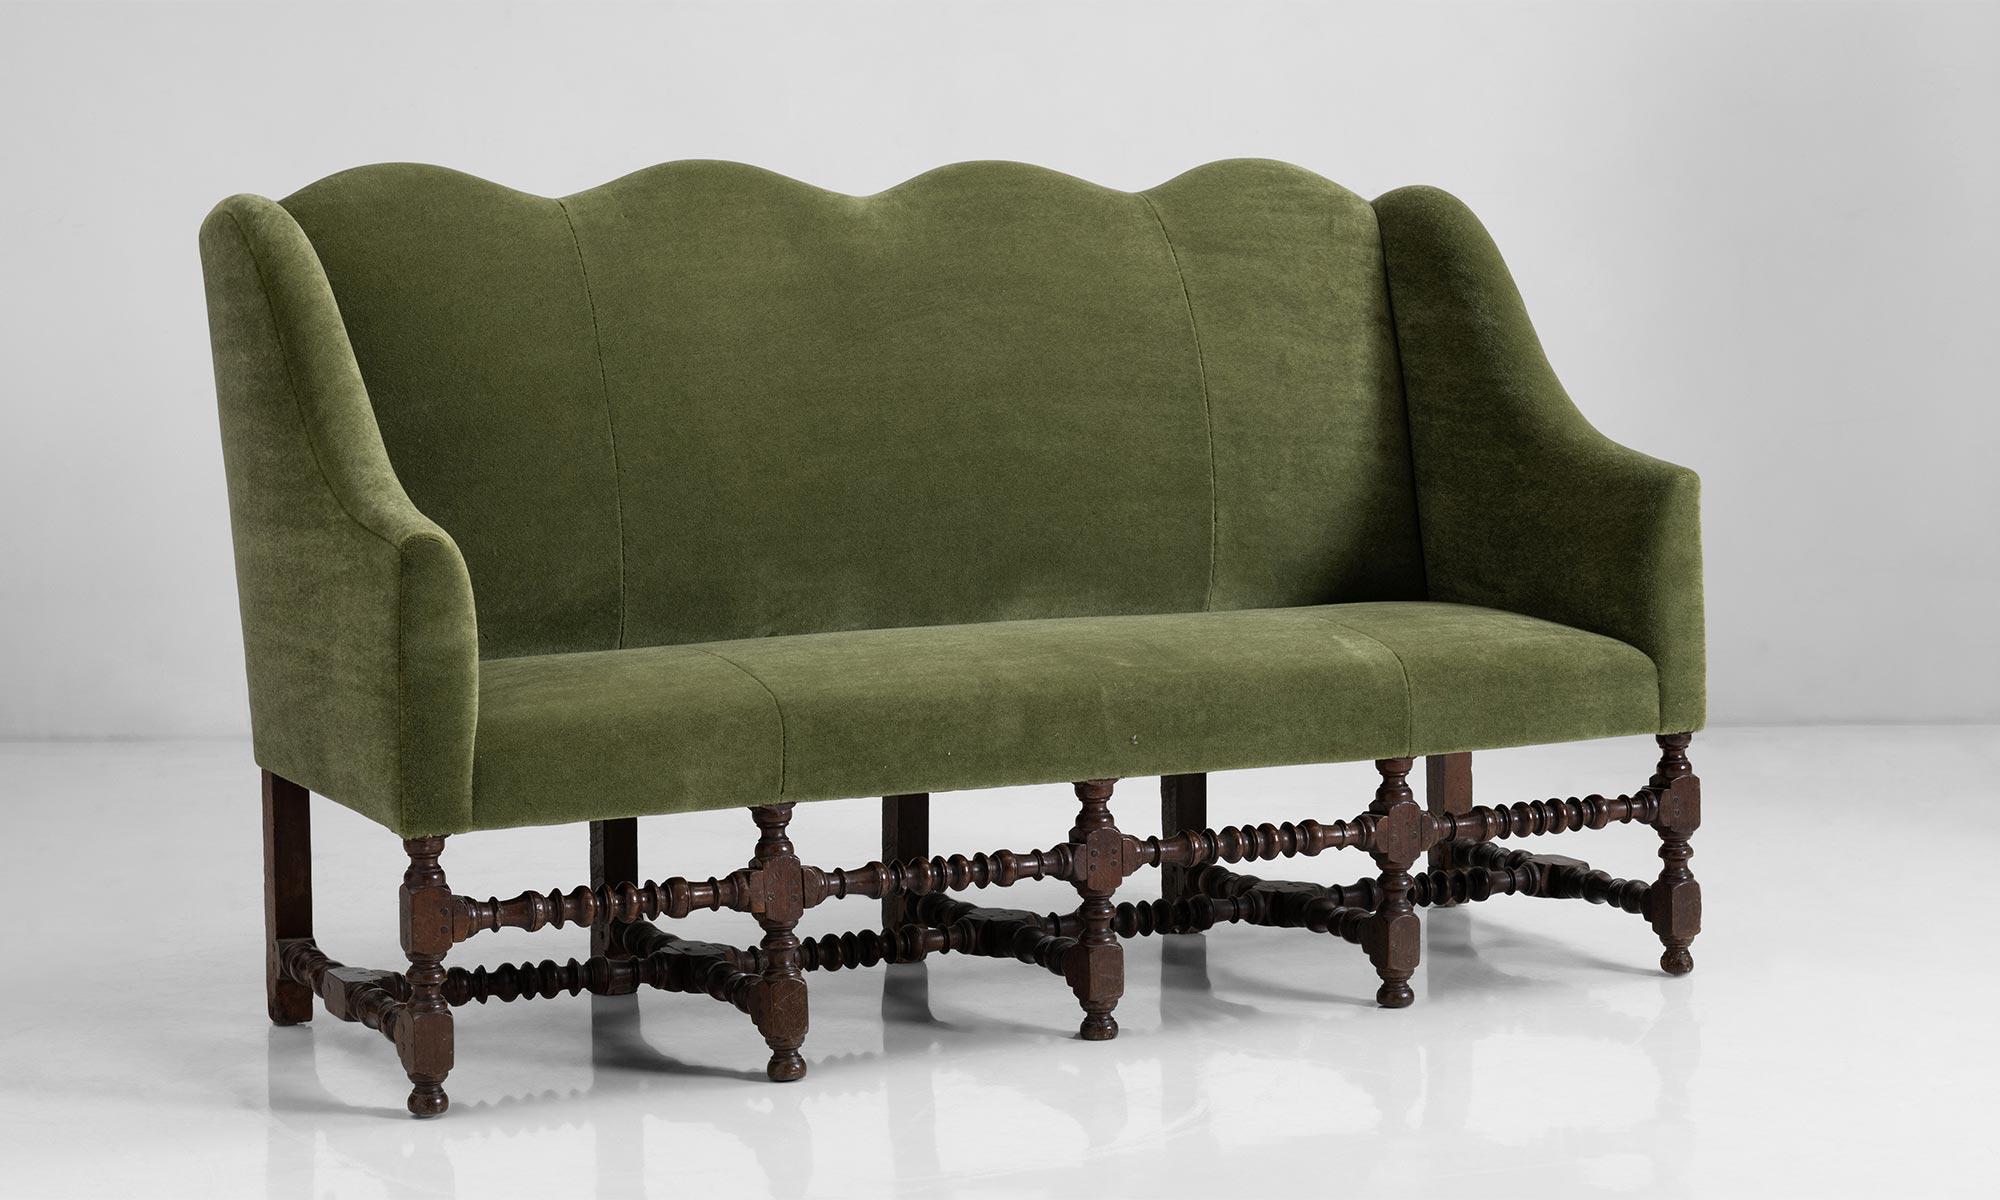 French Louis XIII Style Sofa in Mohair Velvet from Pierre Frey, France Circa 1840